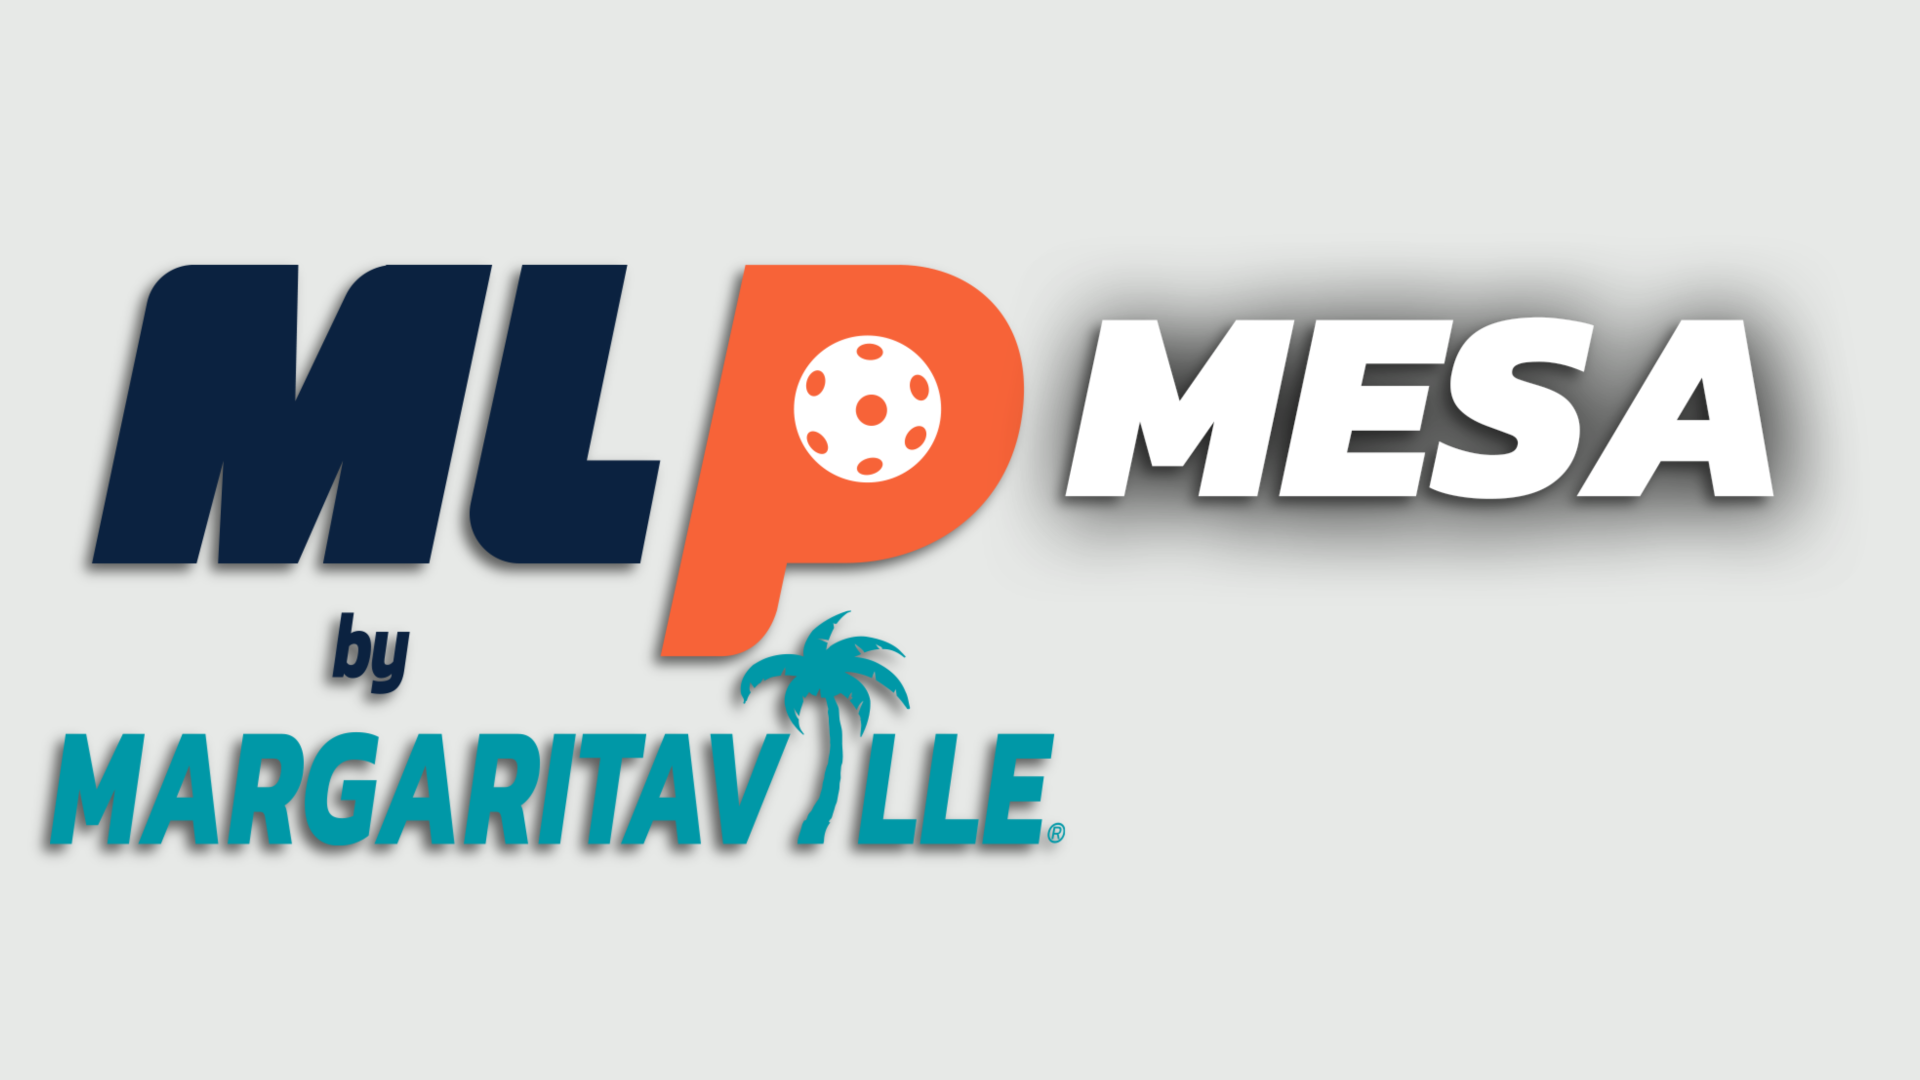 A logo that says "MLP by Margaritaville Mesa"